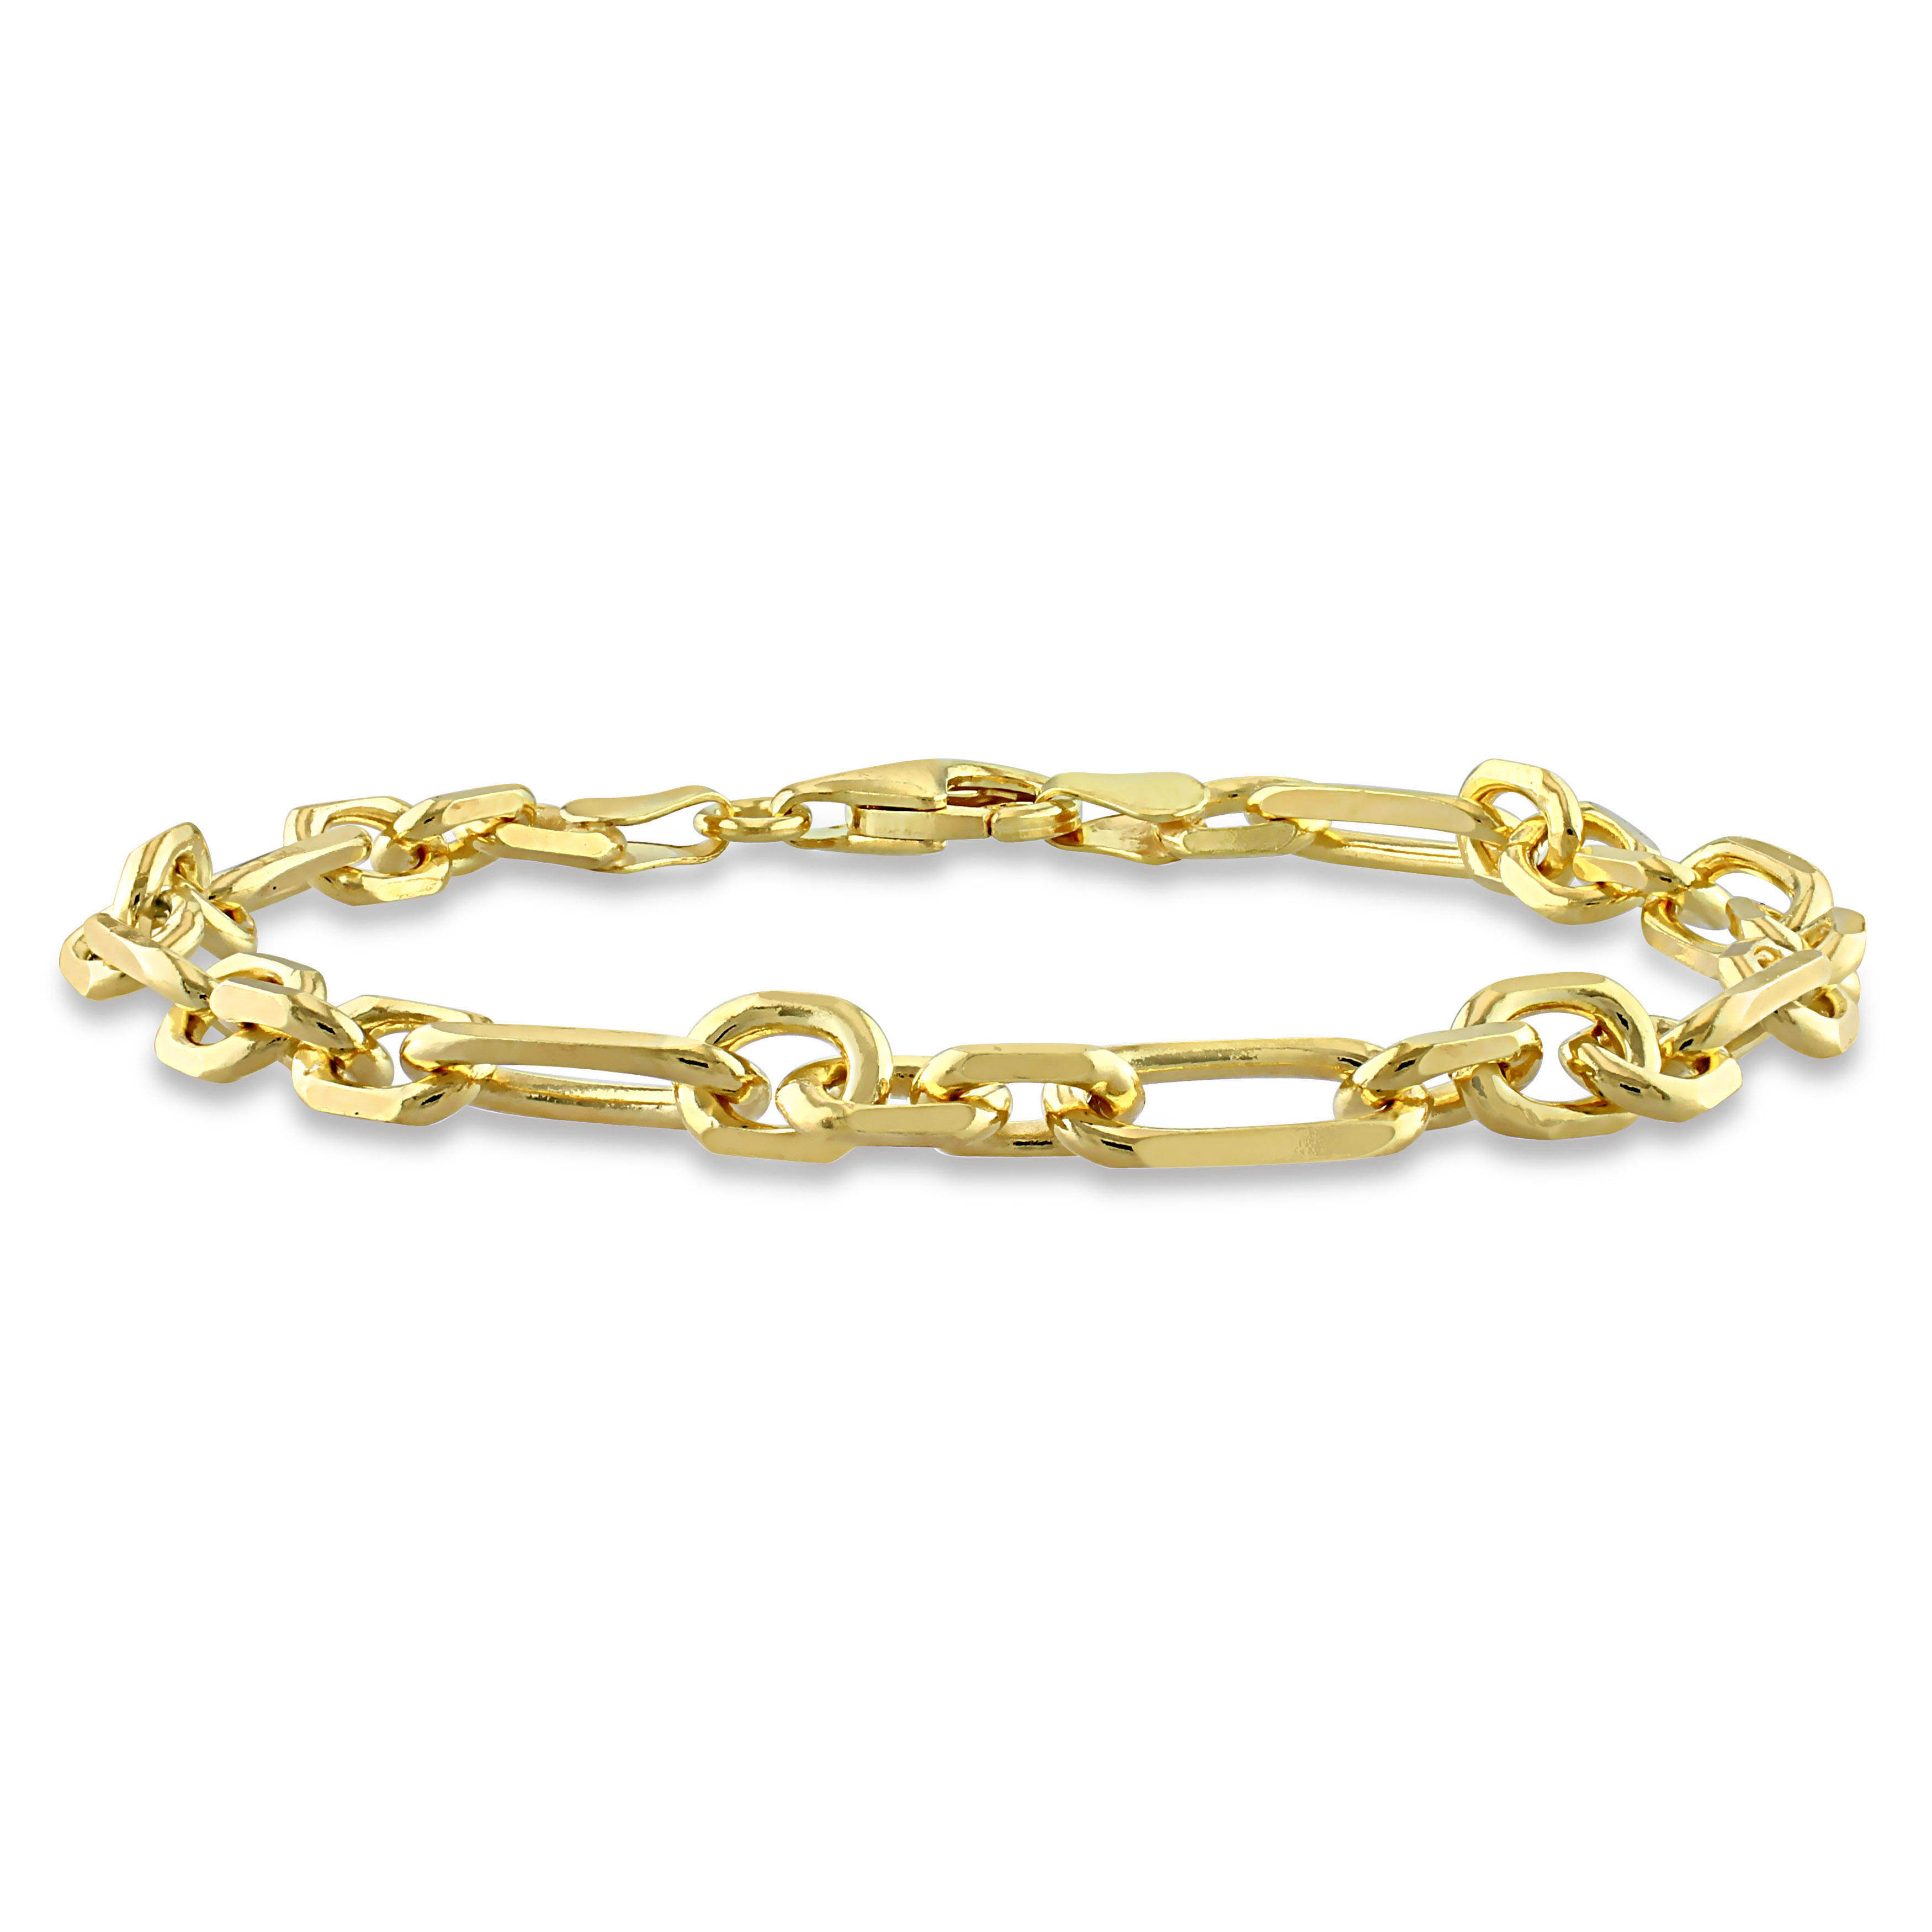 Figaro Rolo Bracelet in Yellow Plated Sterling Silver - 7.5 in.